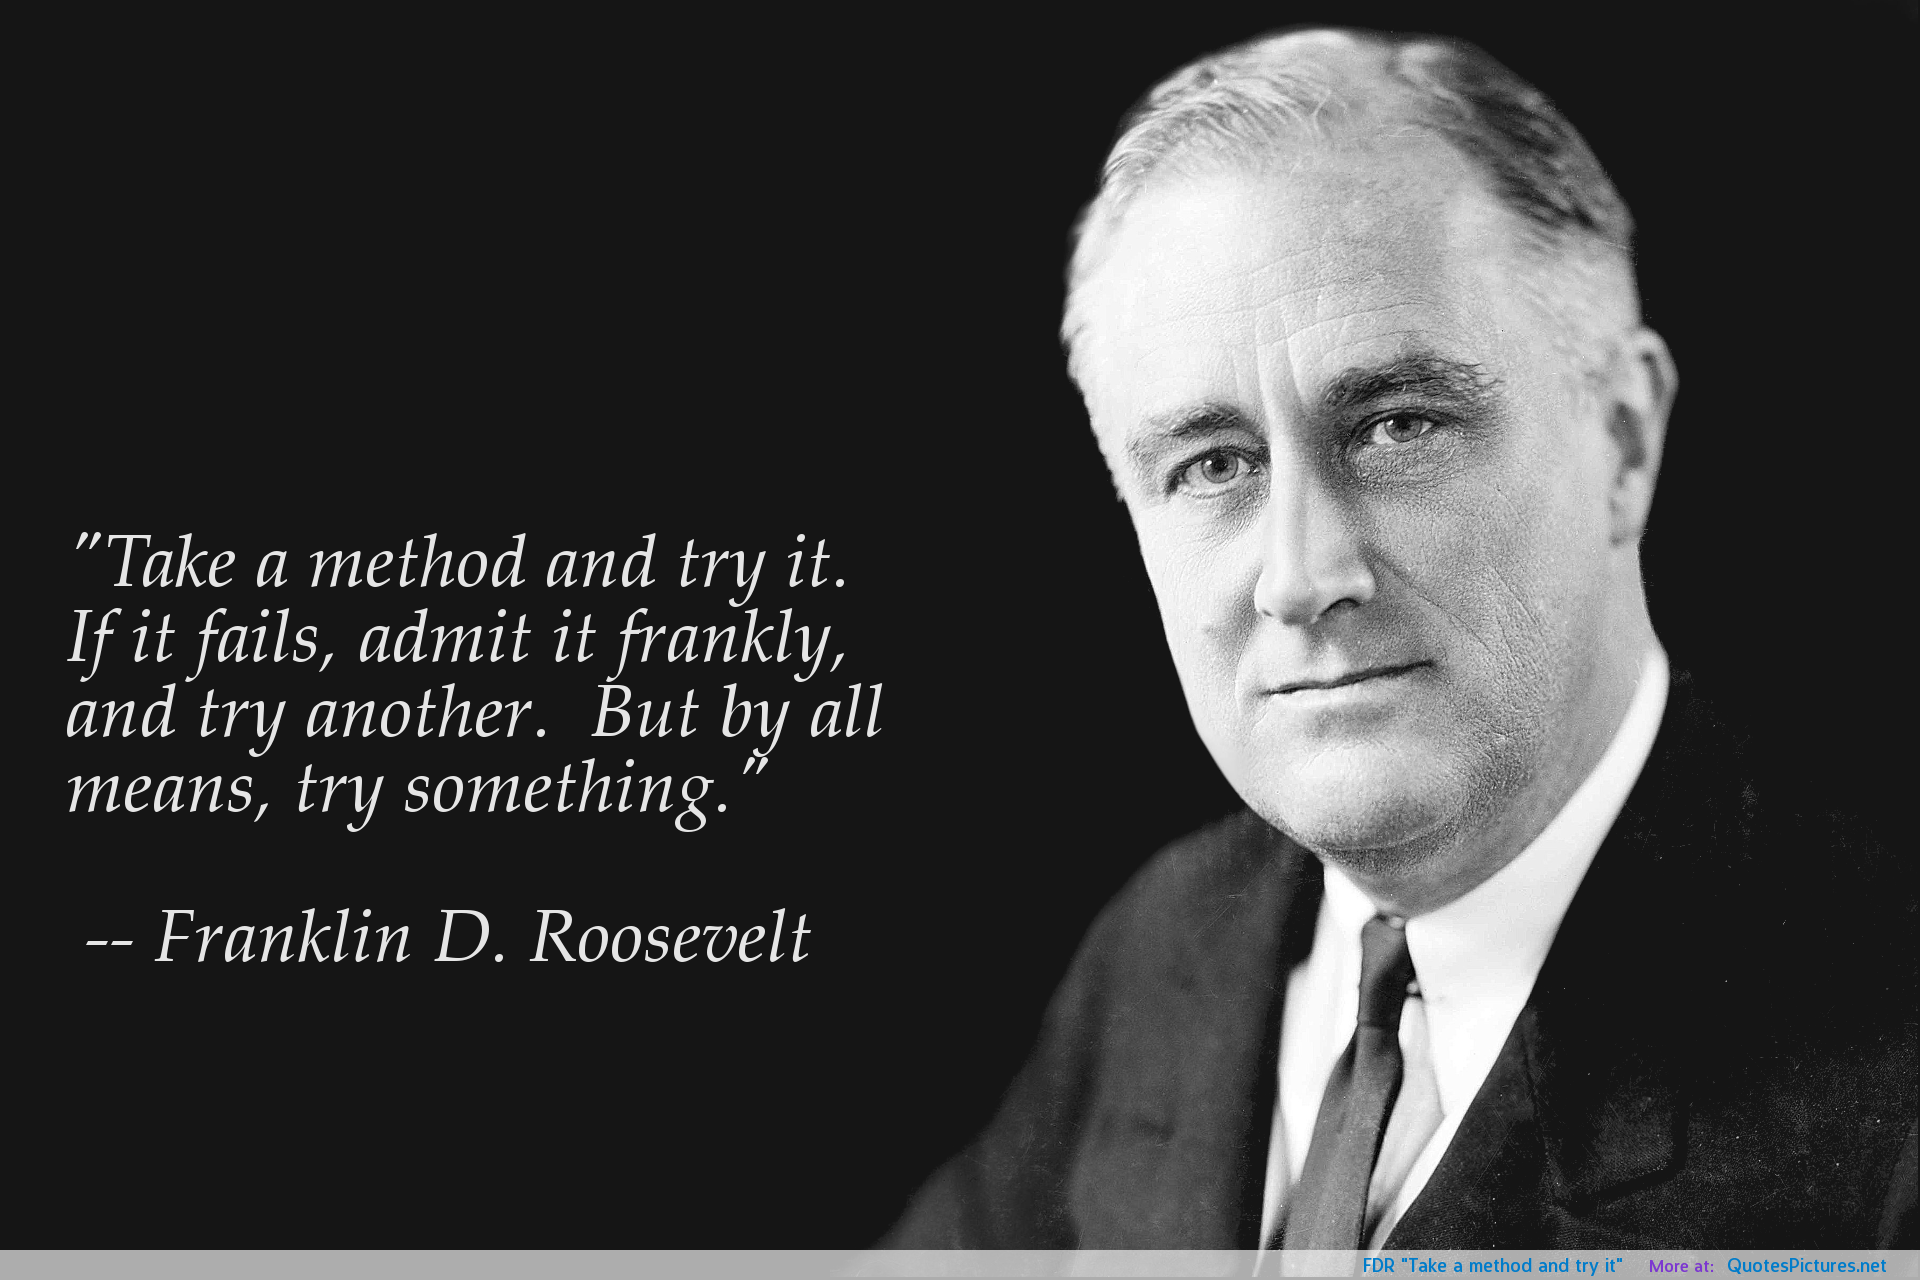 Axelrods Quotations of Franklin Roosevelt in Nothing